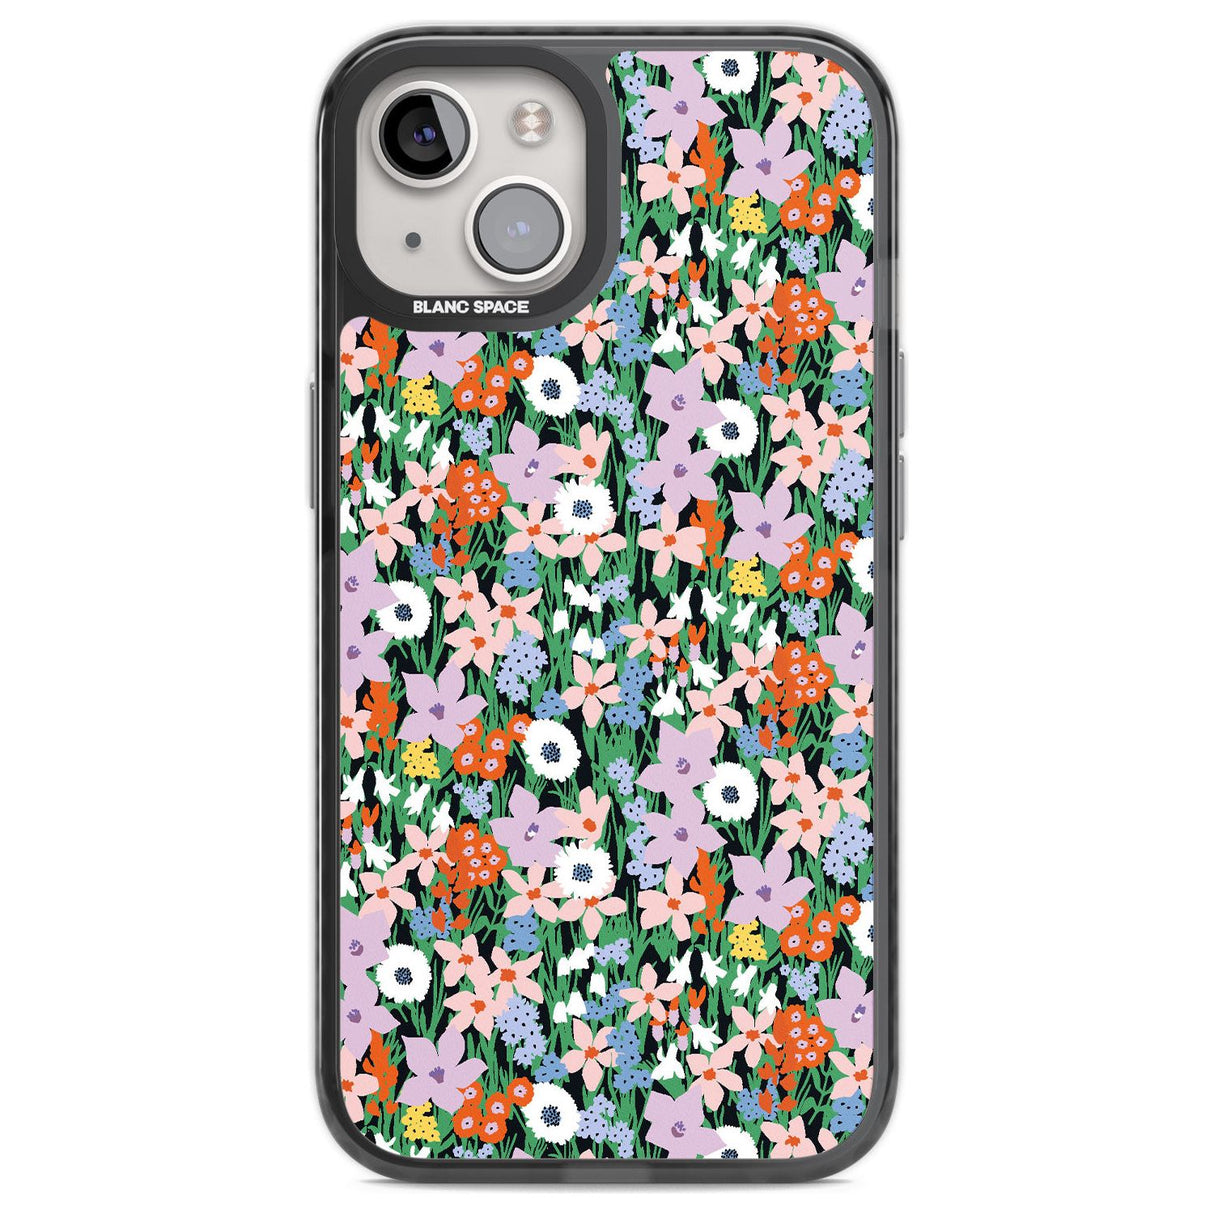 Jazzy Floral Mix: Solid Phone Case iPhone 12 / Black Impact Case,iPhone 13 / Black Impact Case,iPhone 12 Pro / Black Impact Case,iPhone 14 / Black Impact Case,iPhone 15 Plus / Black Impact Case,iPhone 15 / Black Impact Case Blanc Space